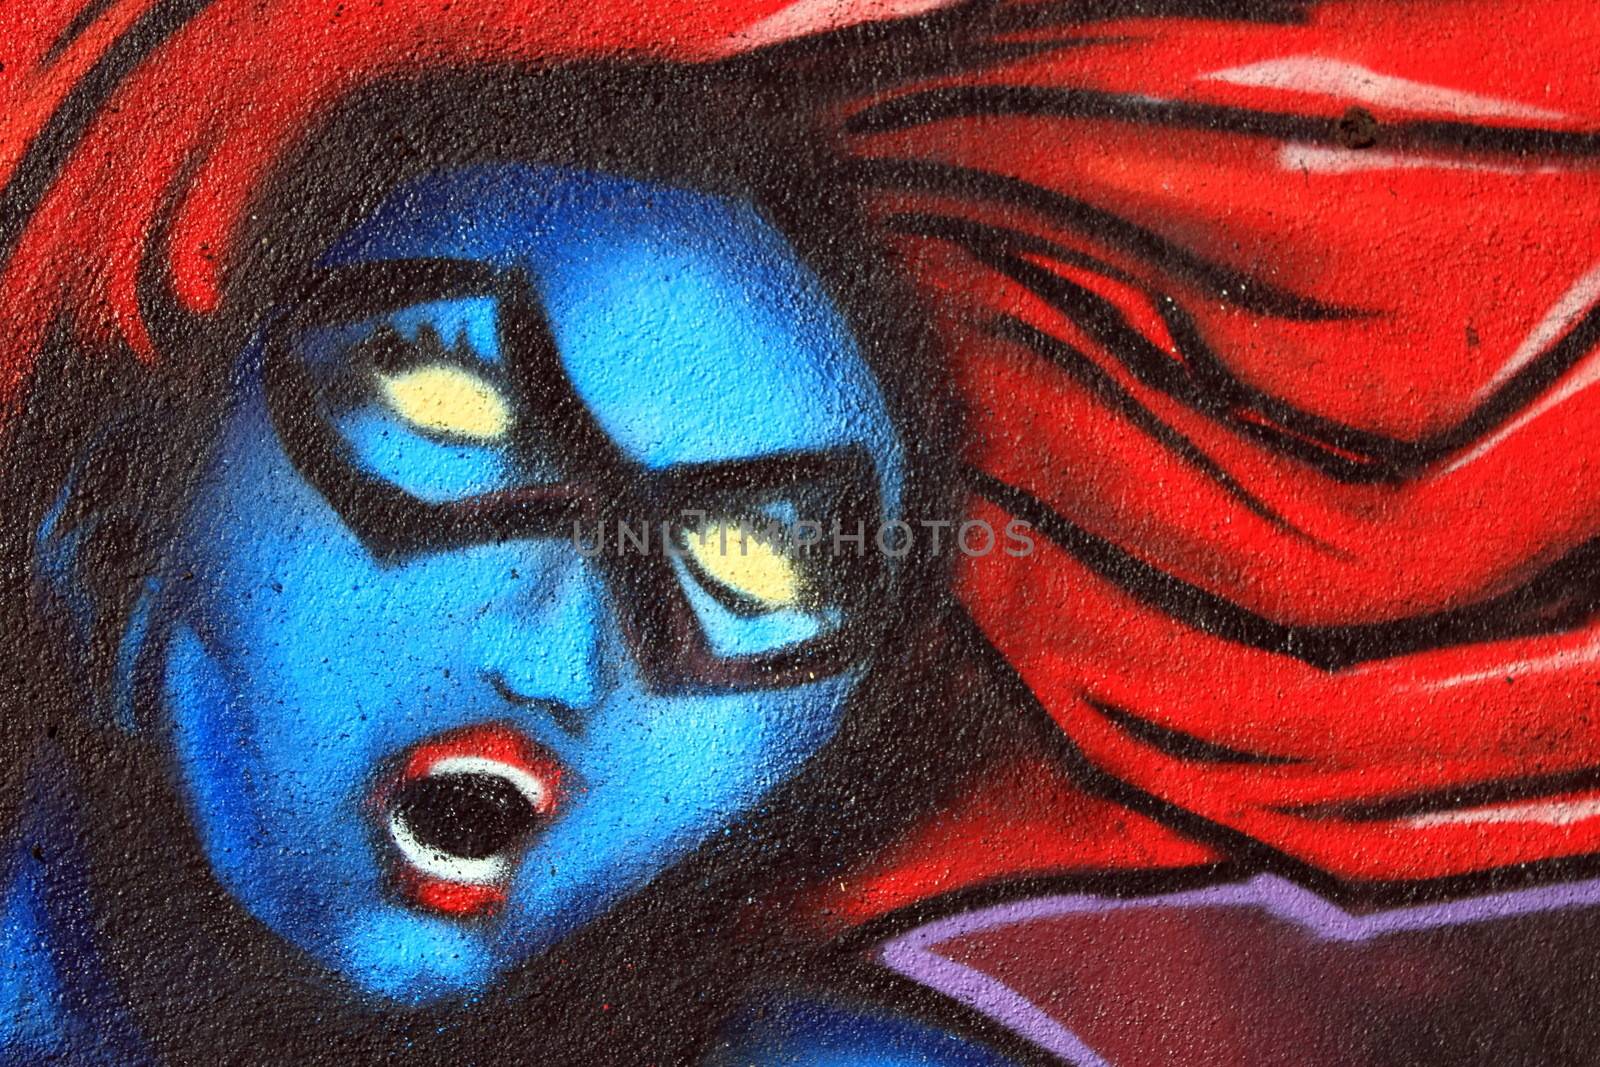 Graffiti on a wall of the blue woman head with red hair